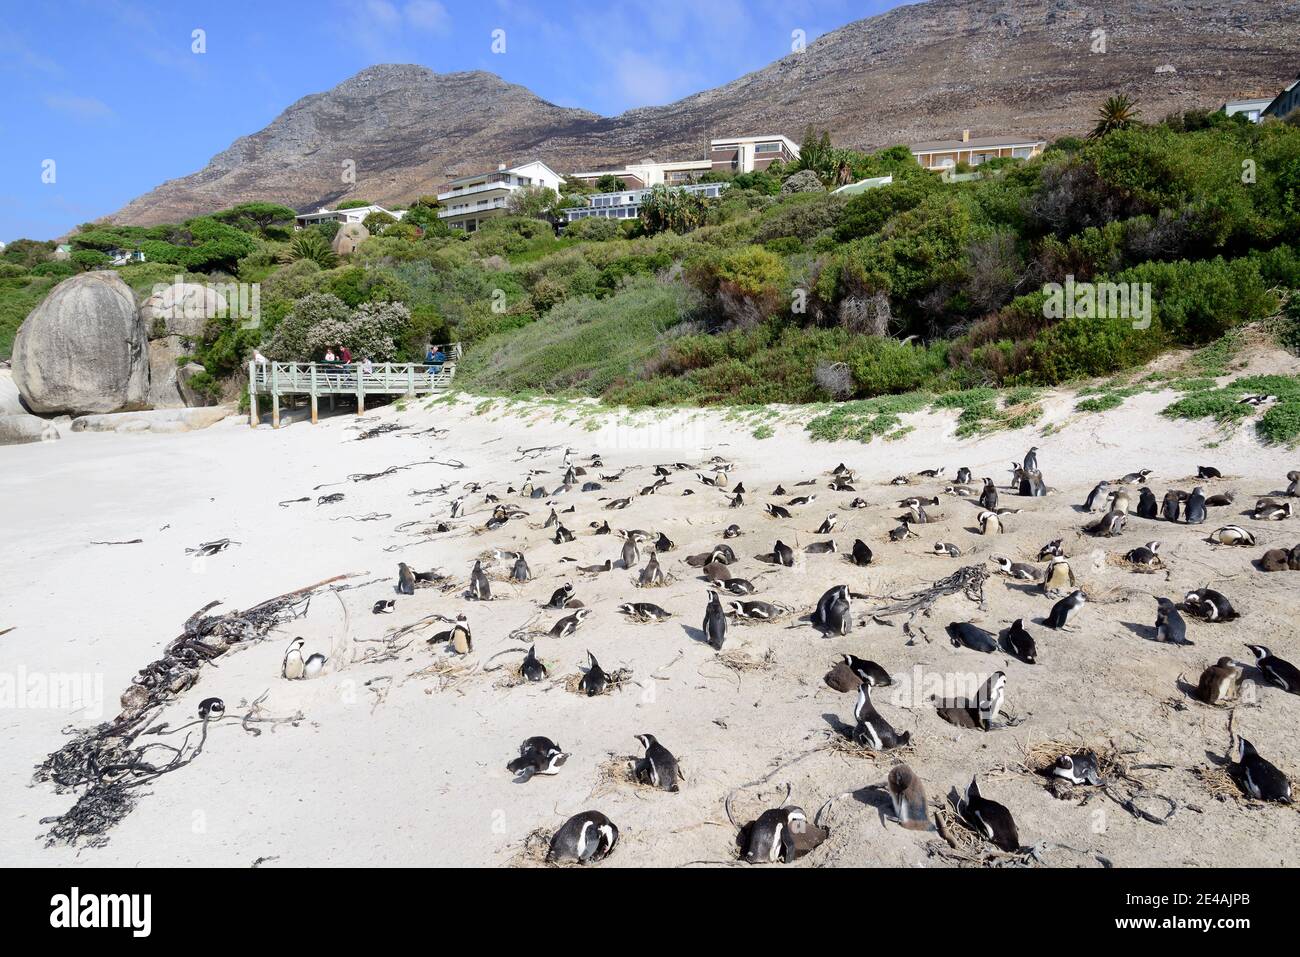 Colony of African penguins (Spheniscus demersus) at the nesting site at the beach, Boulders Beach or Boulders Bay, Simons Town, South Africa, Indian Ocean Stock Photo